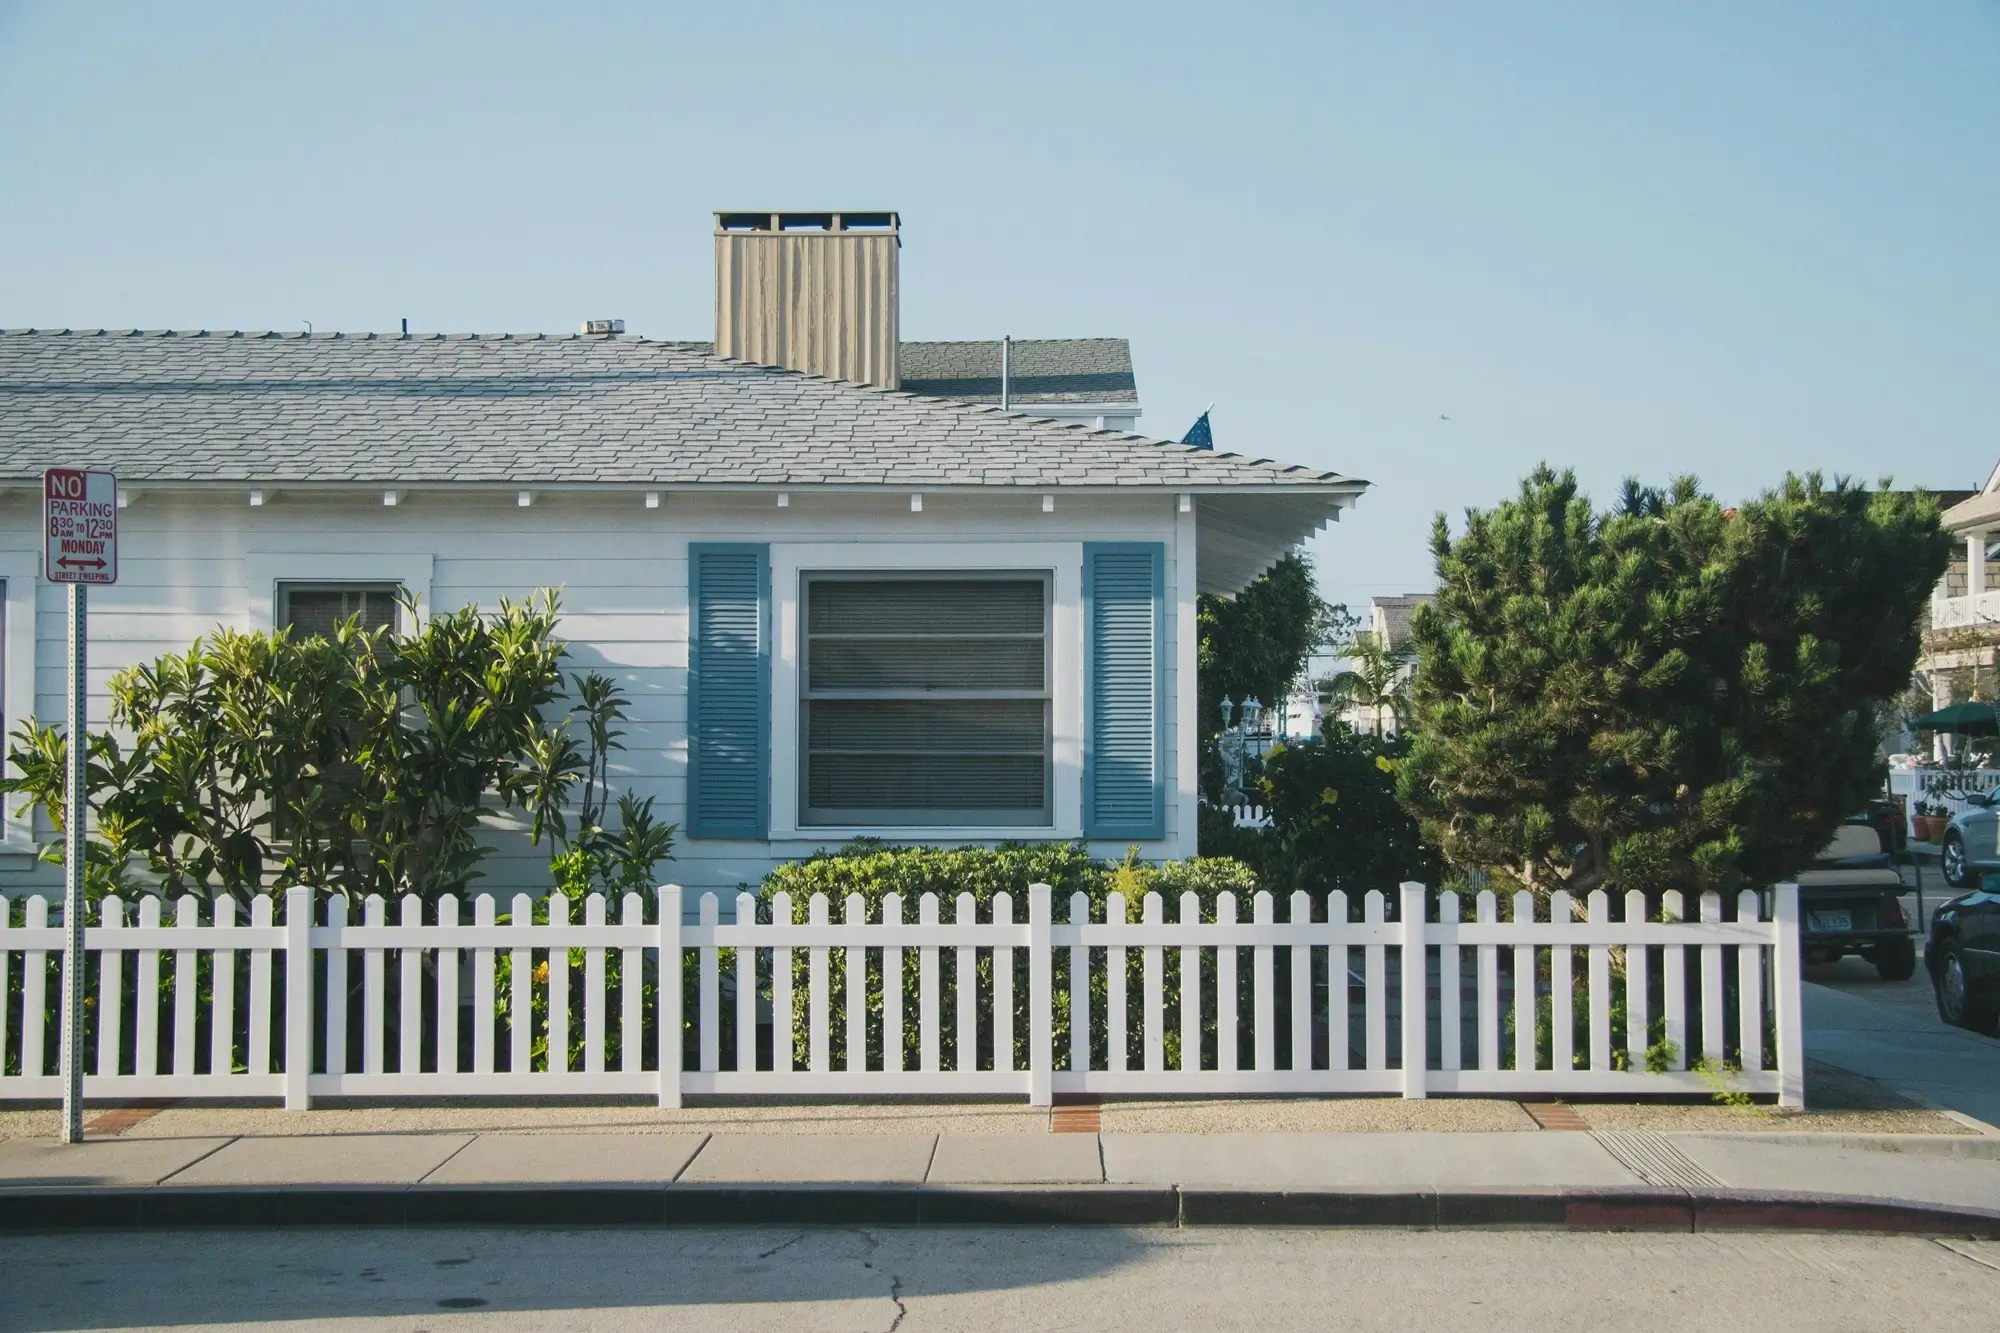 A house with a white picket fence, representing the concept of testamentary trust.